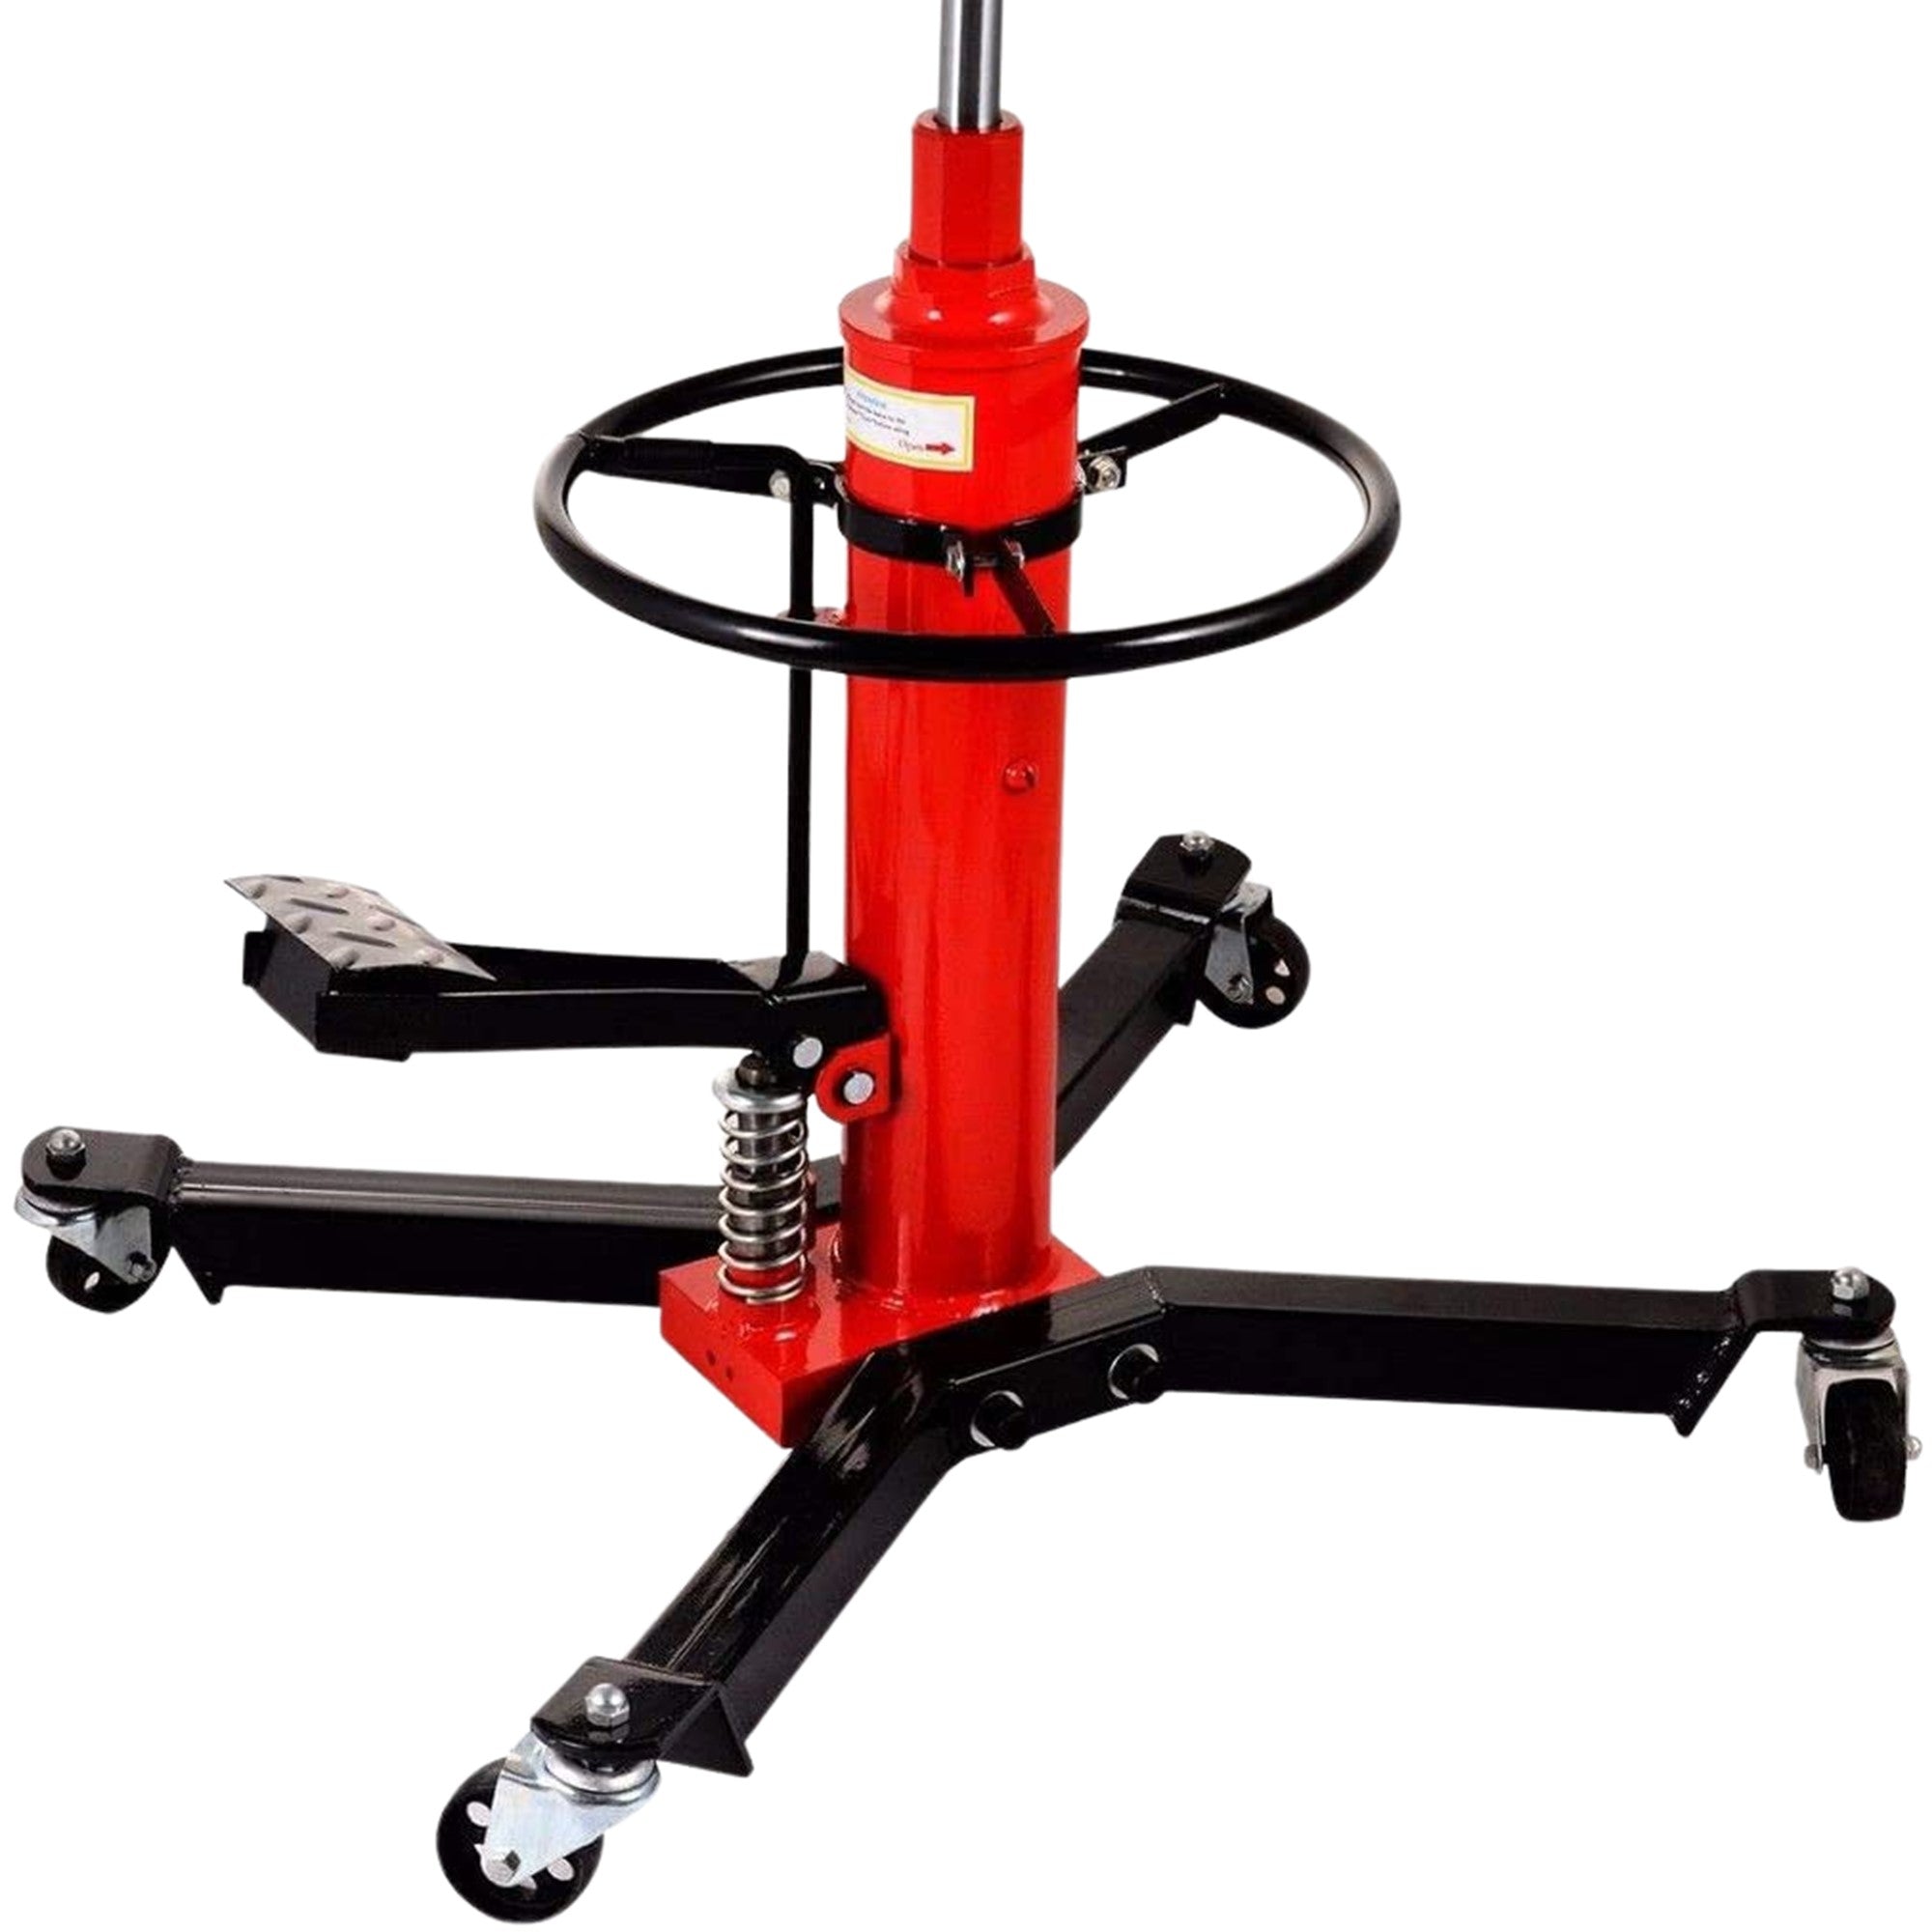 Foot operated pump and lower pedal allow machinist to position and adjust the transmission with hands easily